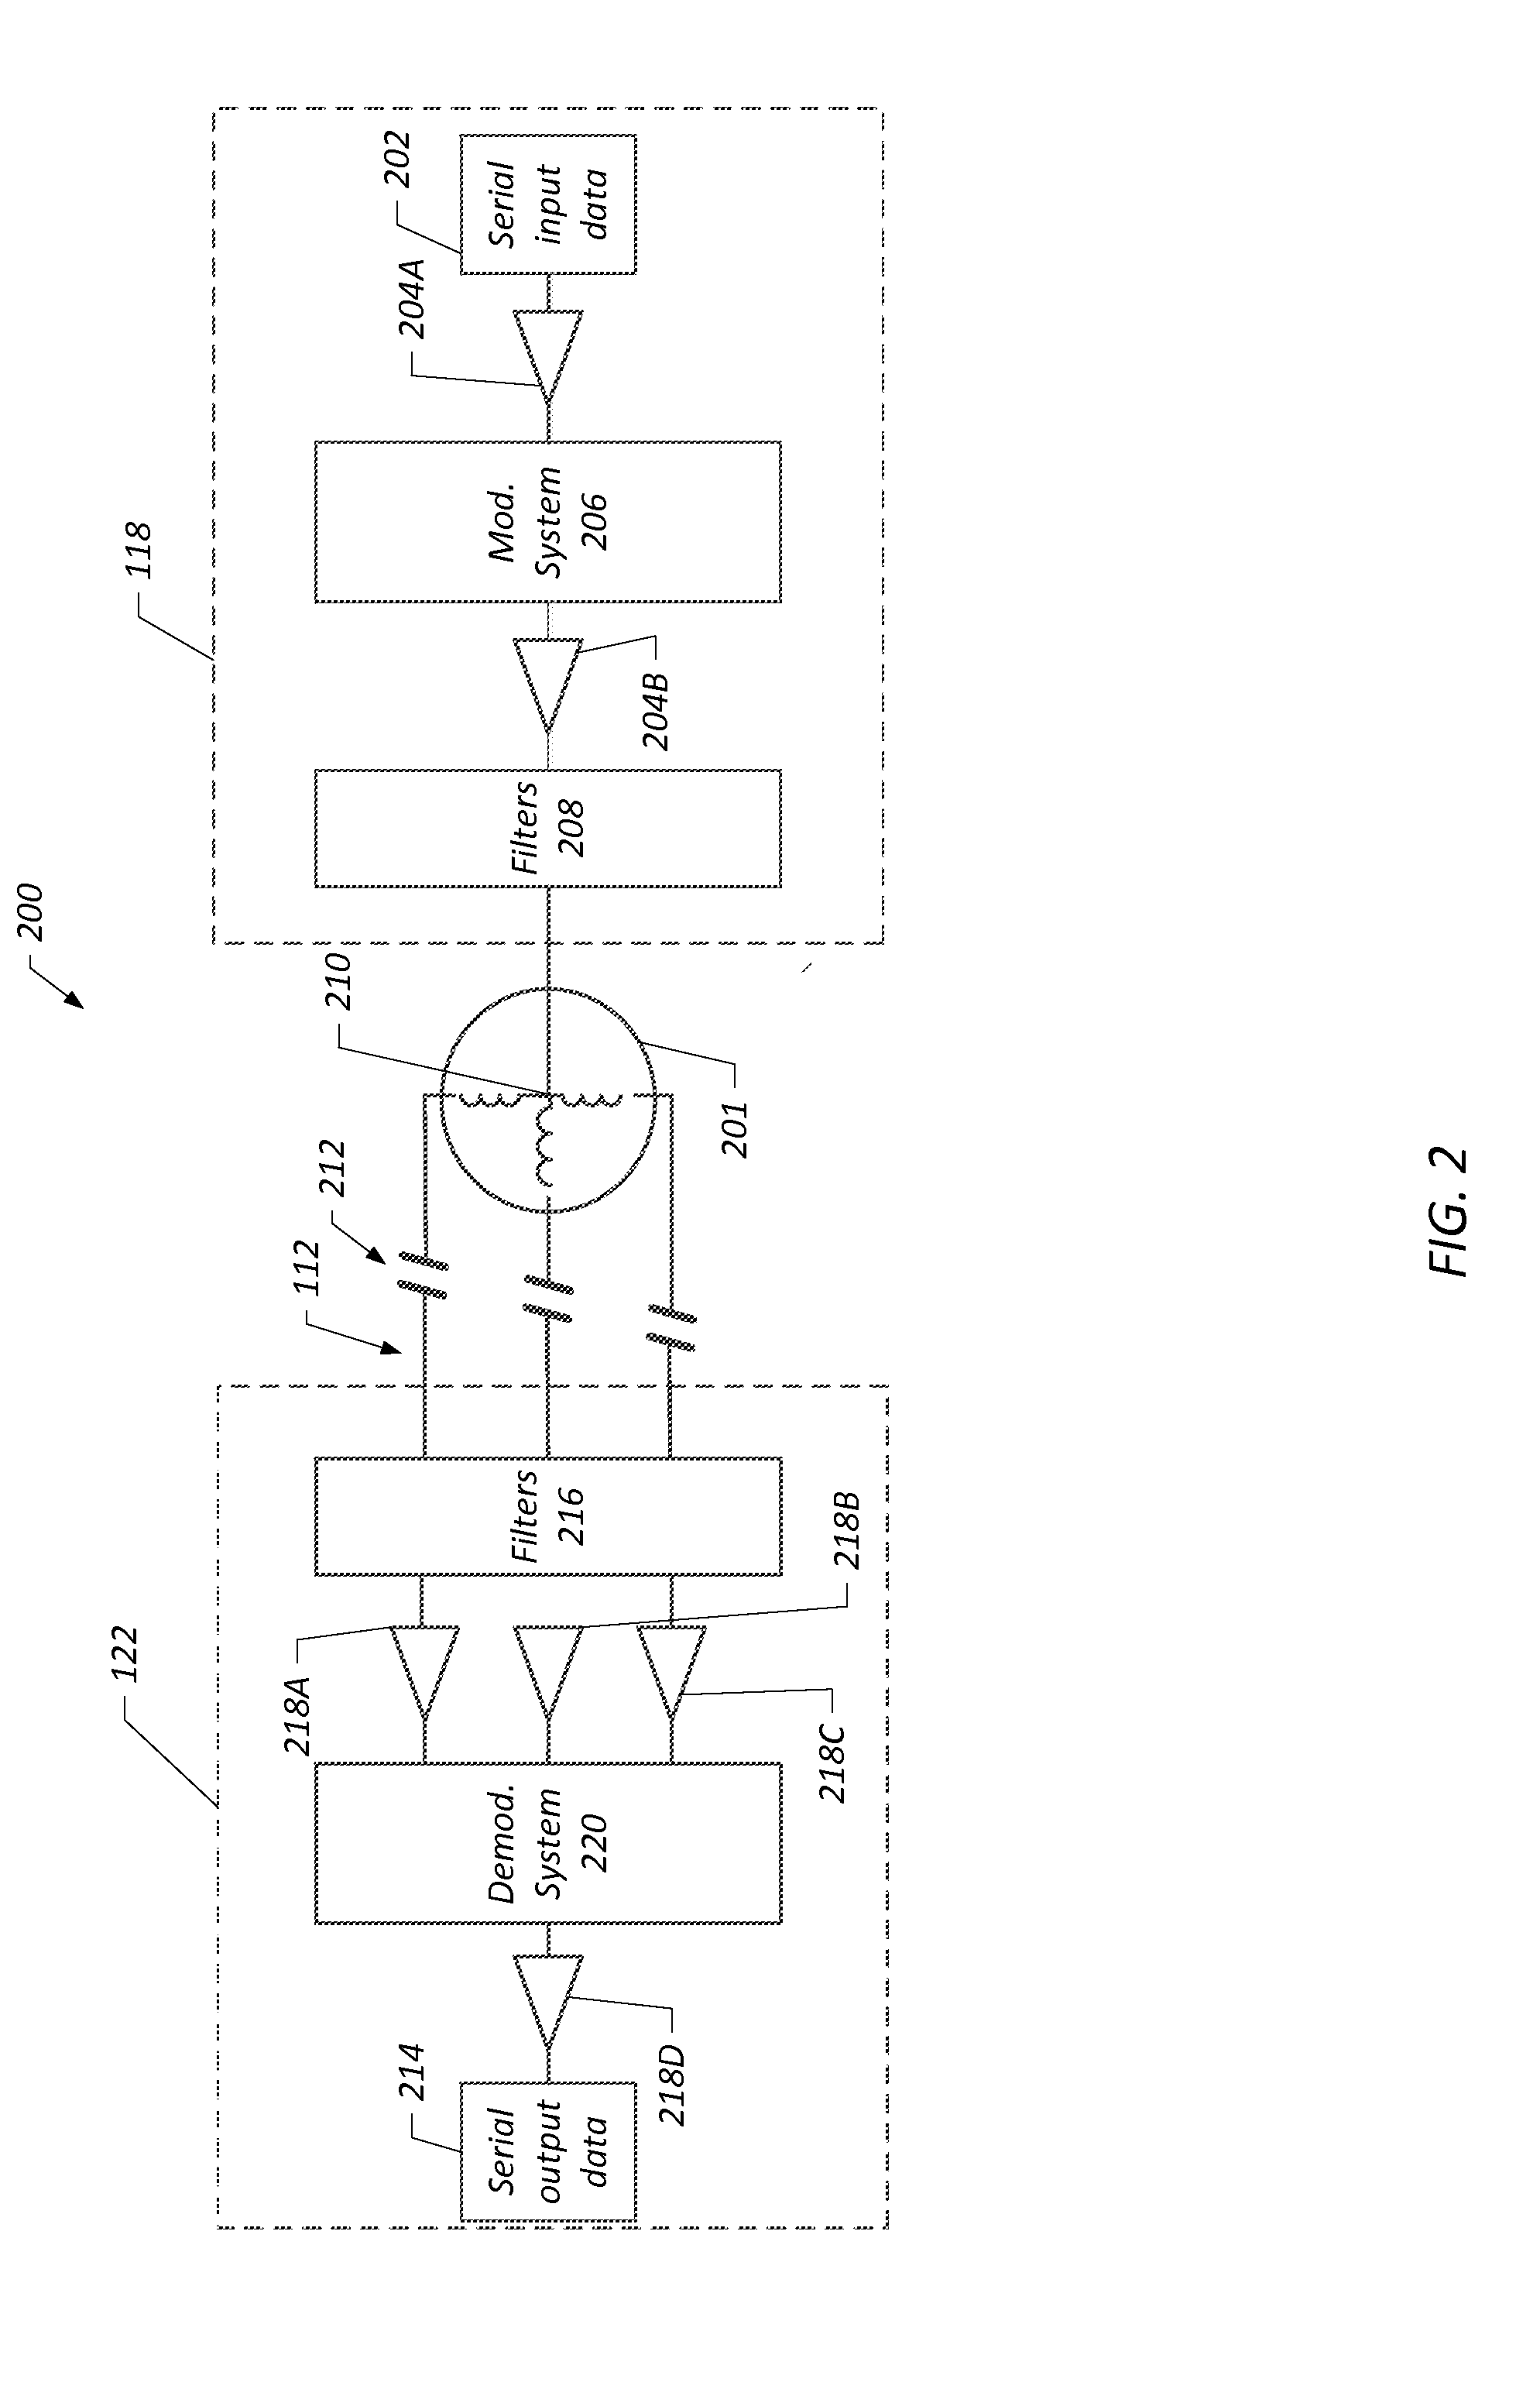 Systems and methods for ground fault immune data measurement systems for electronic submersible pumps